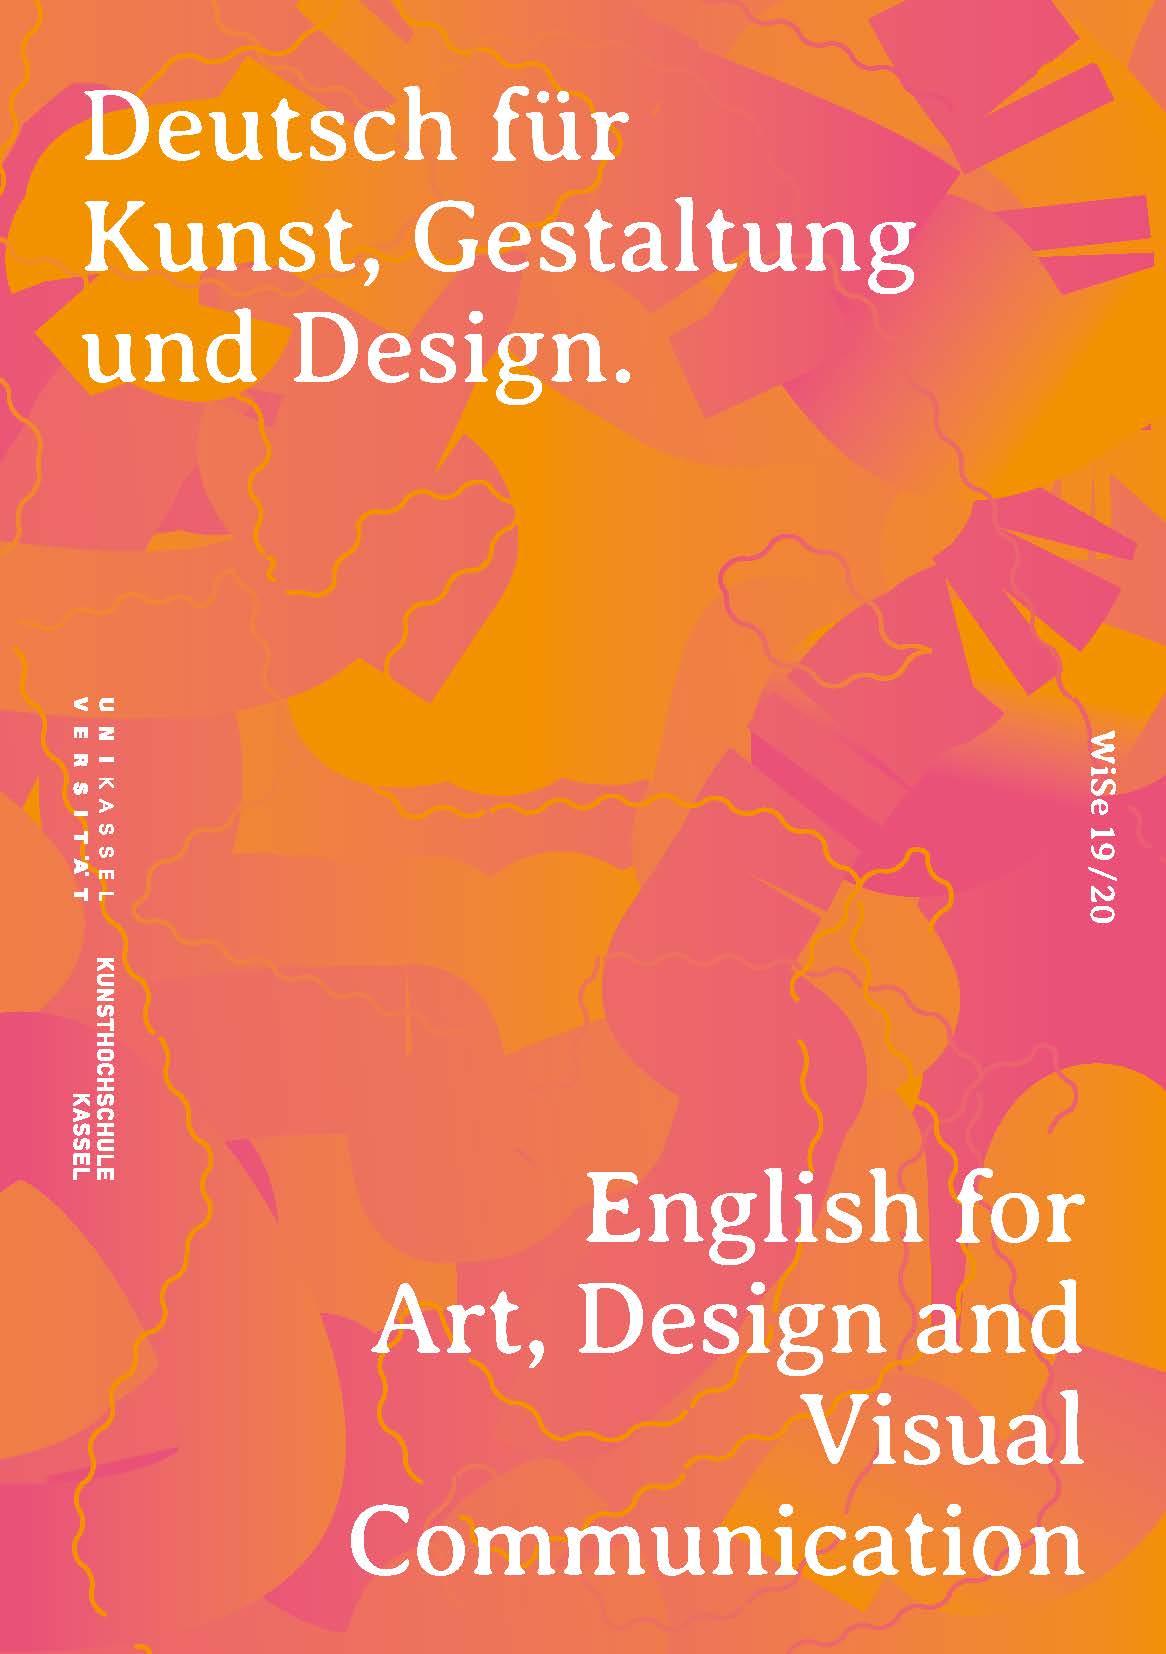 English for Art, Design and Visual Communication